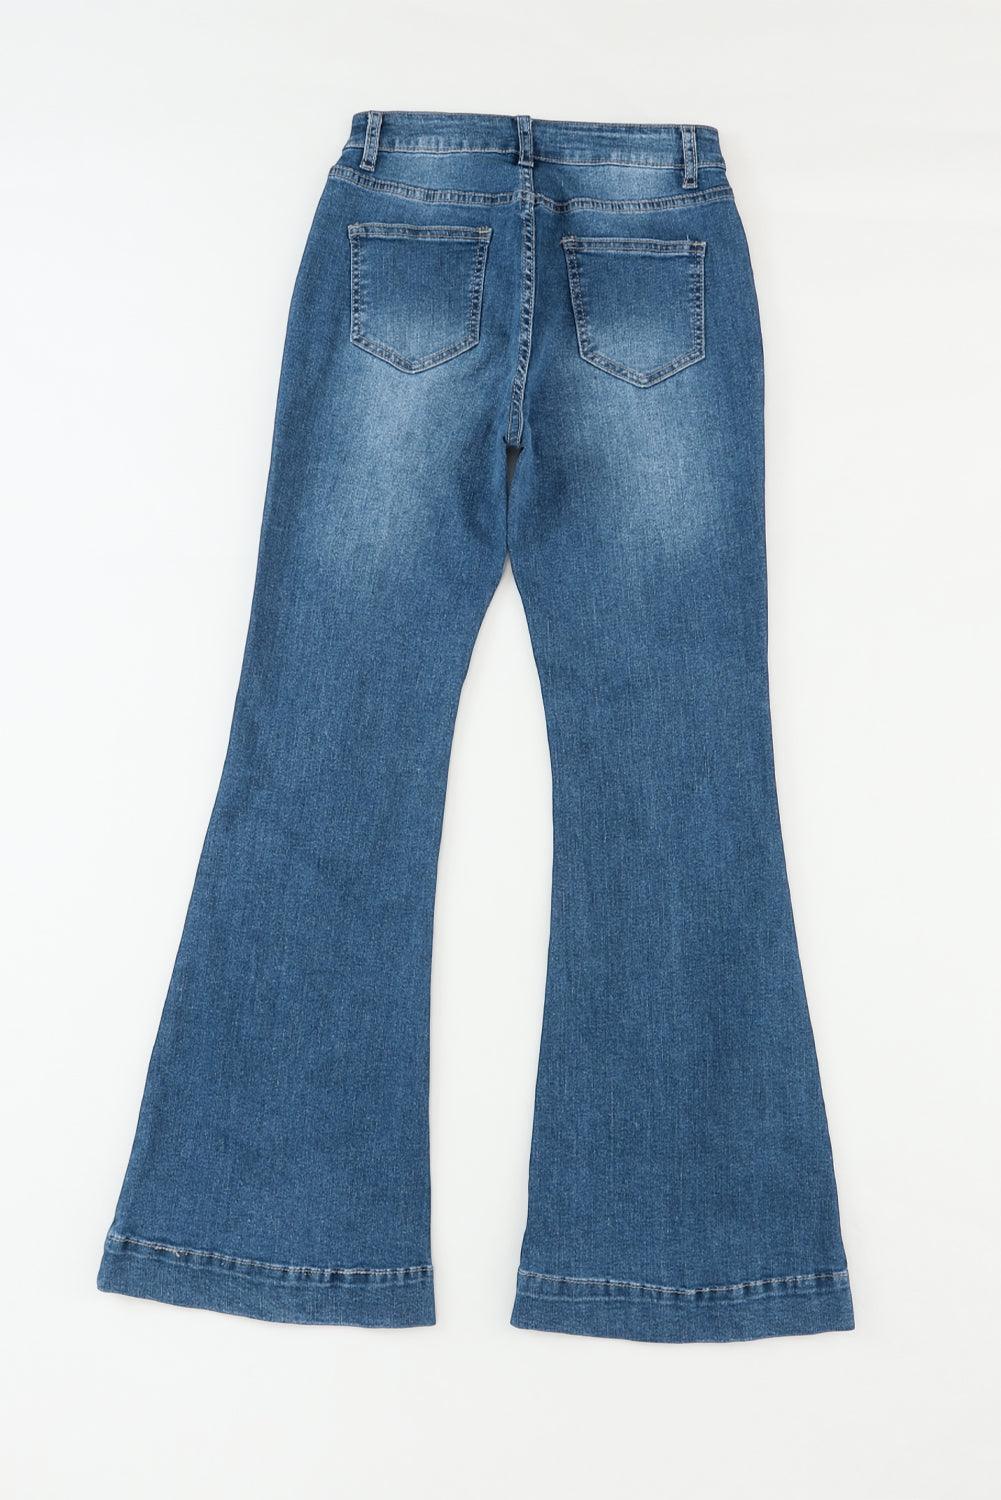 NYC High Waisted Bell Bottom Jeans - Vesteeto